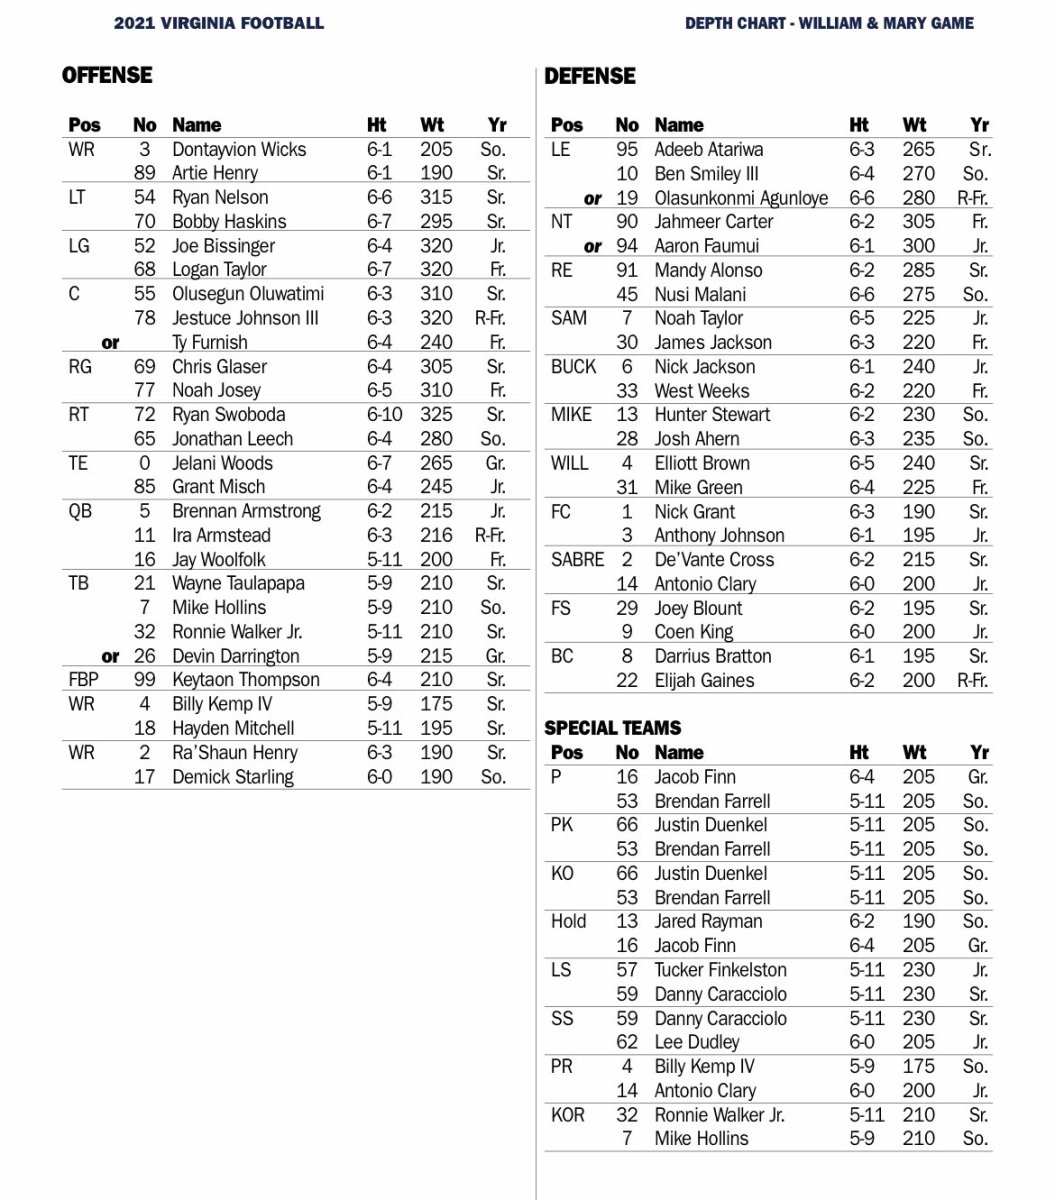 UVA Football Releases Depth Chart for William & Mary Game Sports